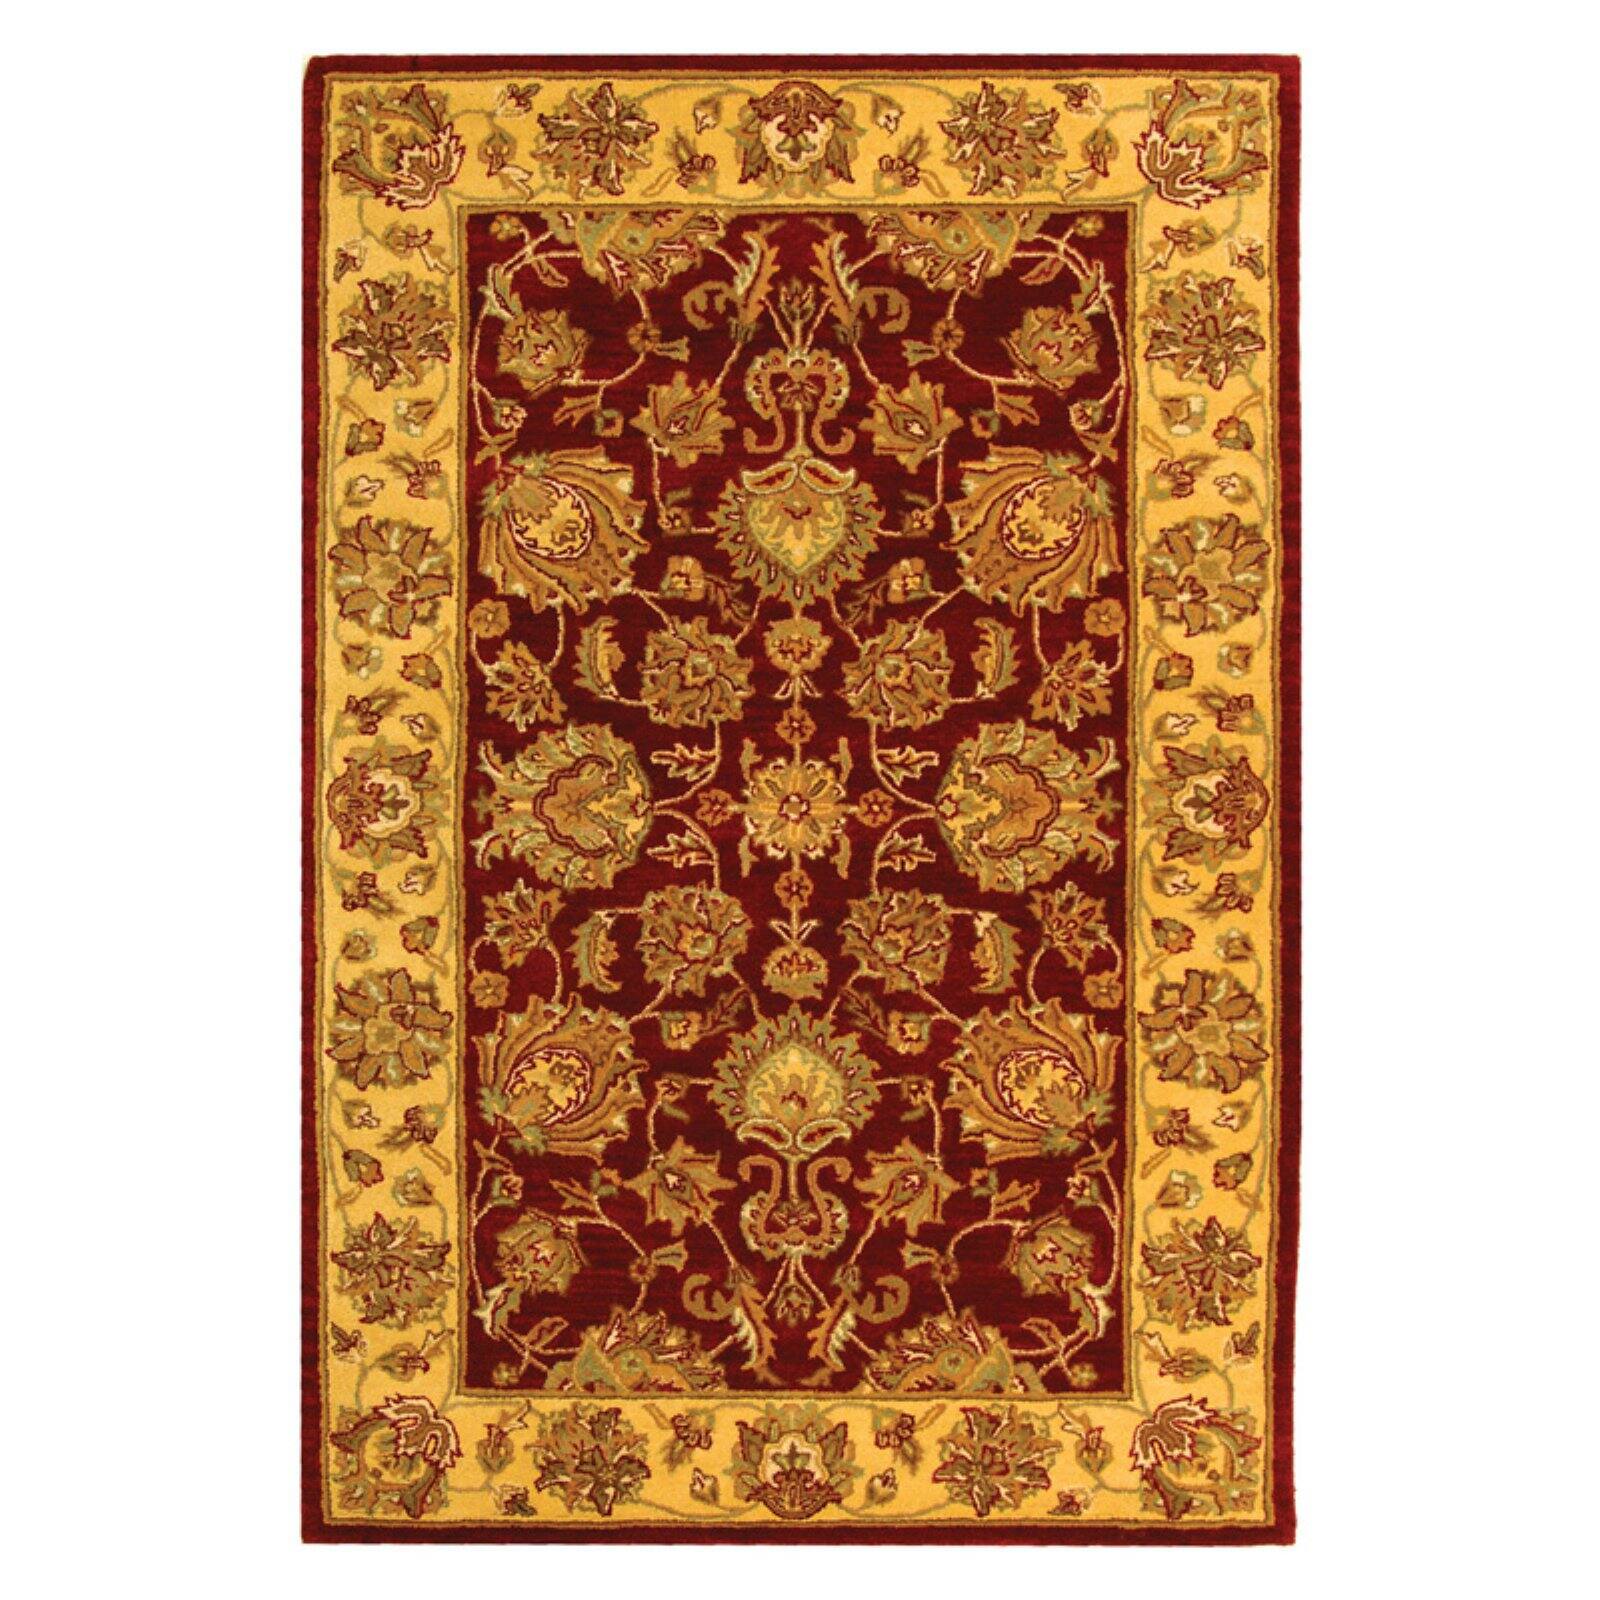 SAFAVIEH Heritage Regis Traditional Wool Area Rug, Red/Gold, 6' x 6' Round - image 4 of 9